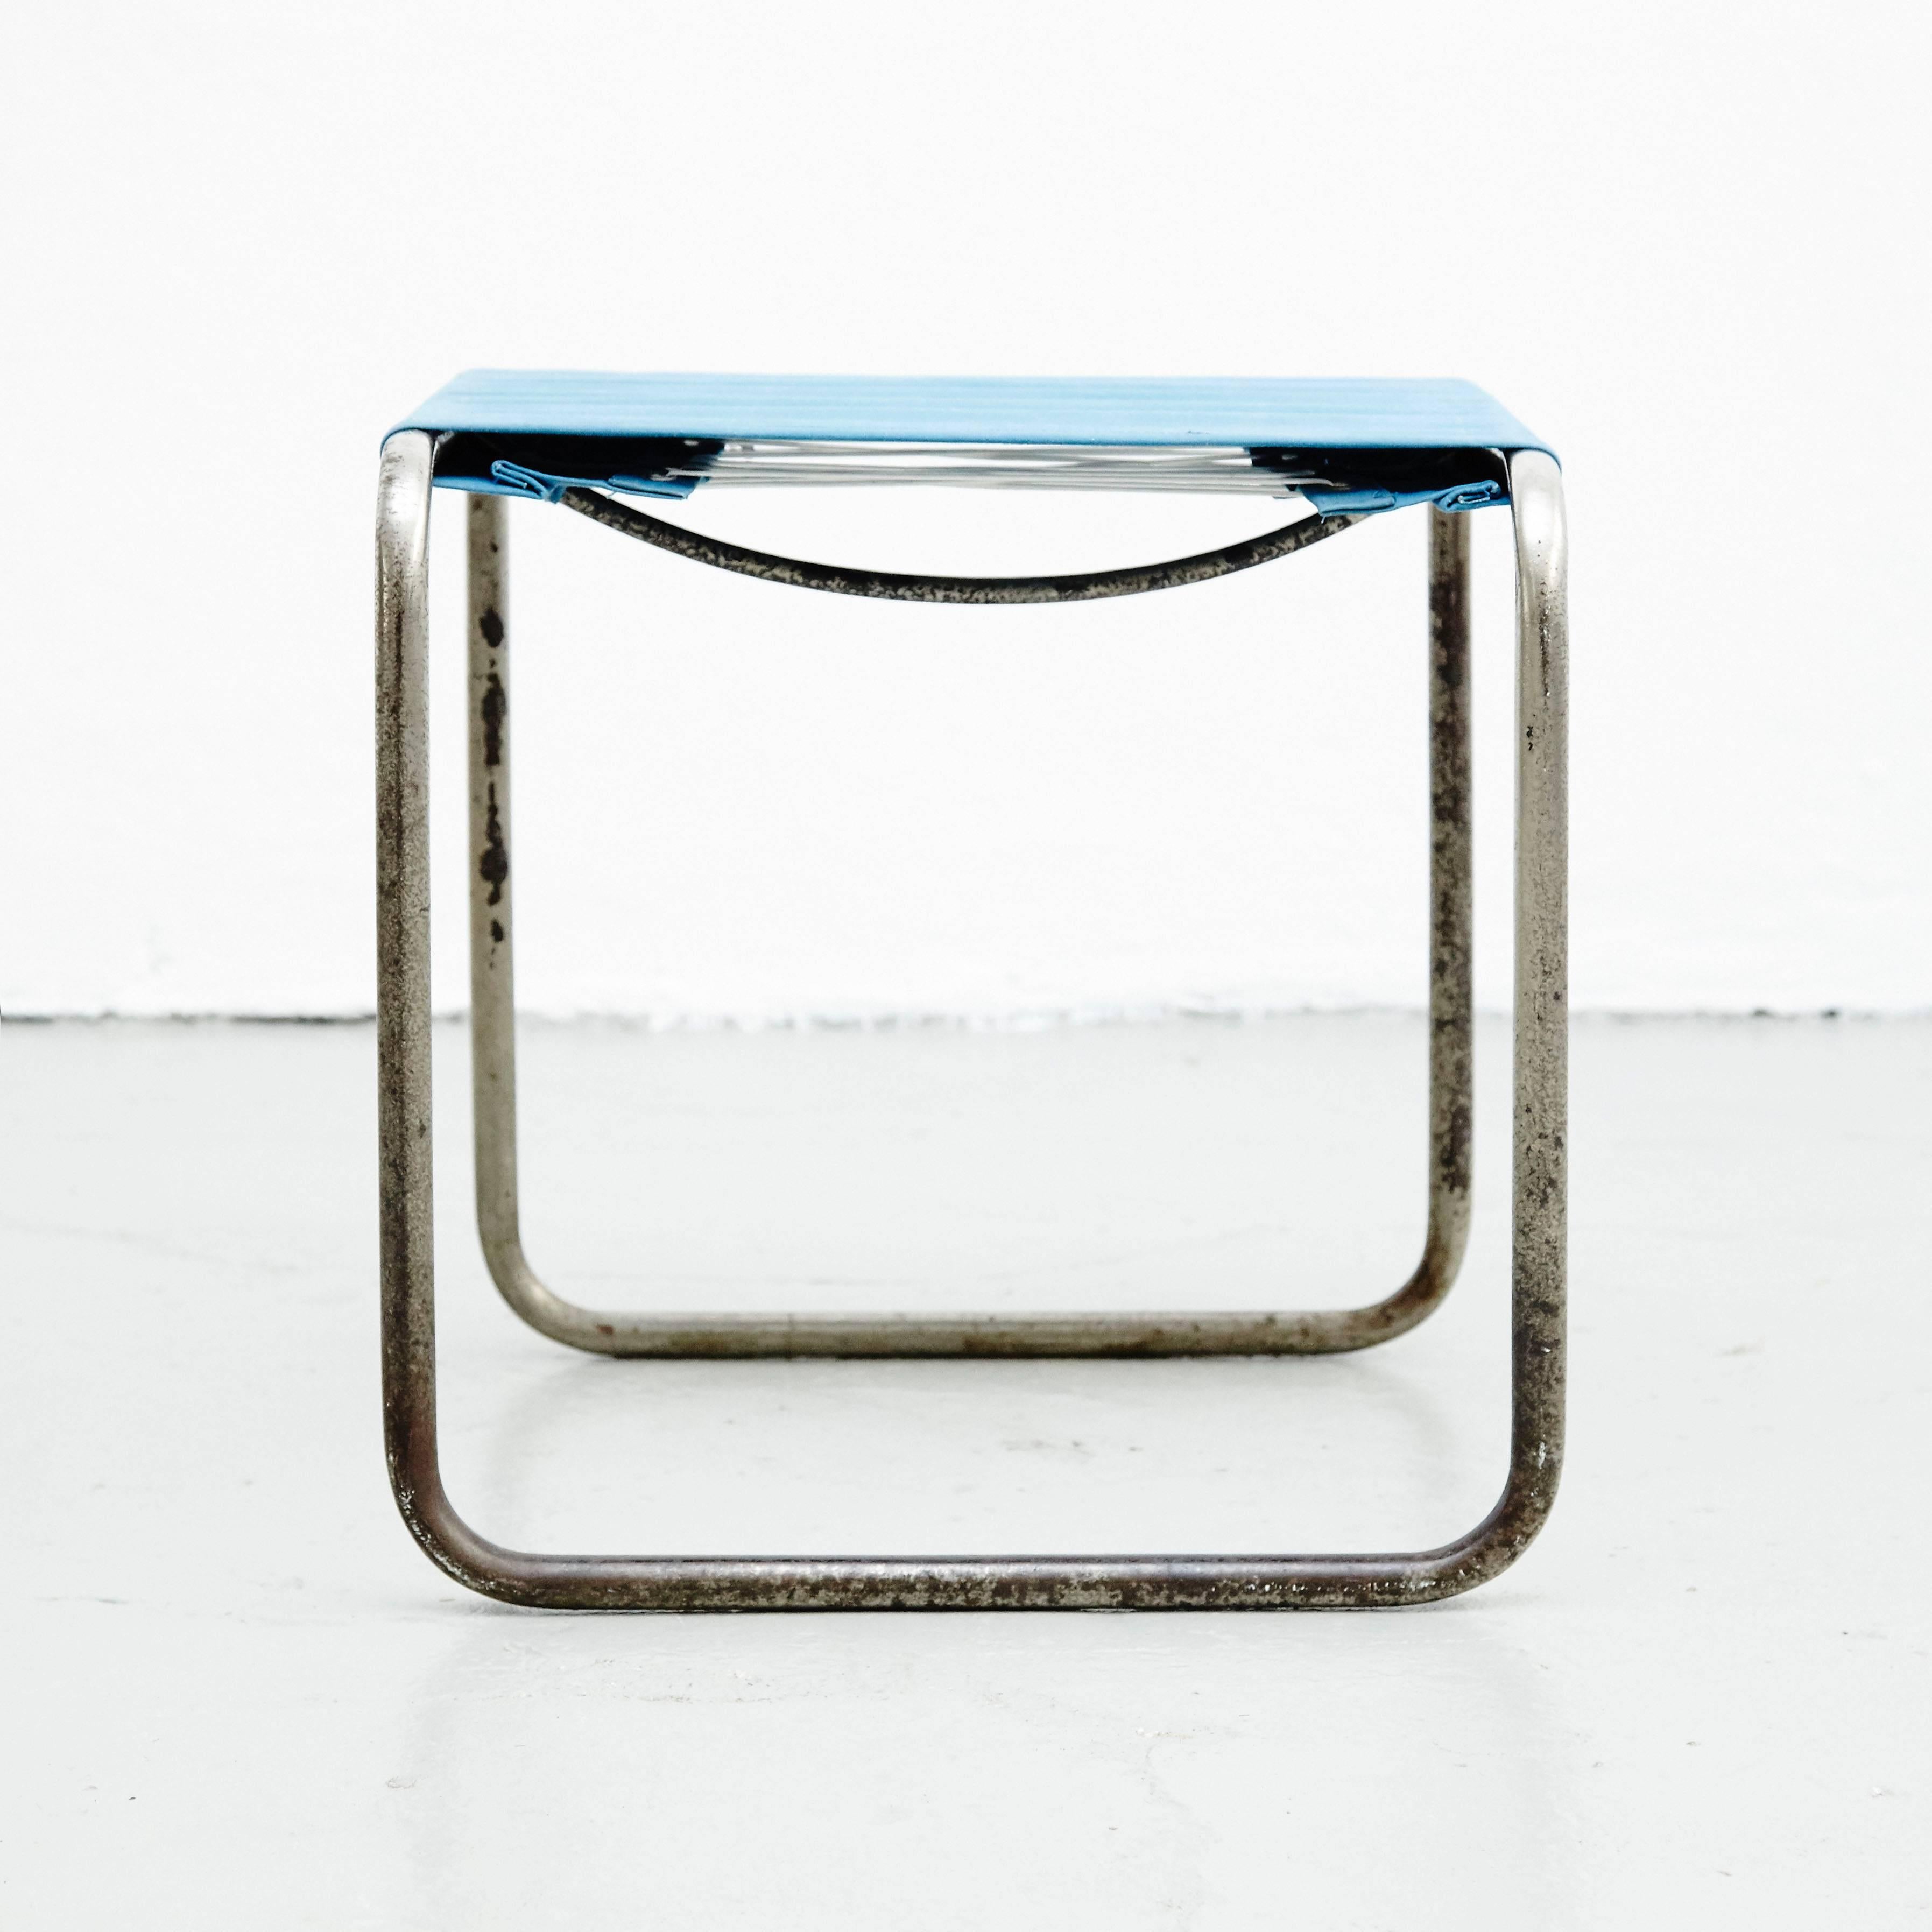 Marcel Breuer B9T Stool for Thonet with Blue Fabric and Metal Tube, circa 1930 im Zustand „Gut“ in Barcelona, Barcelona